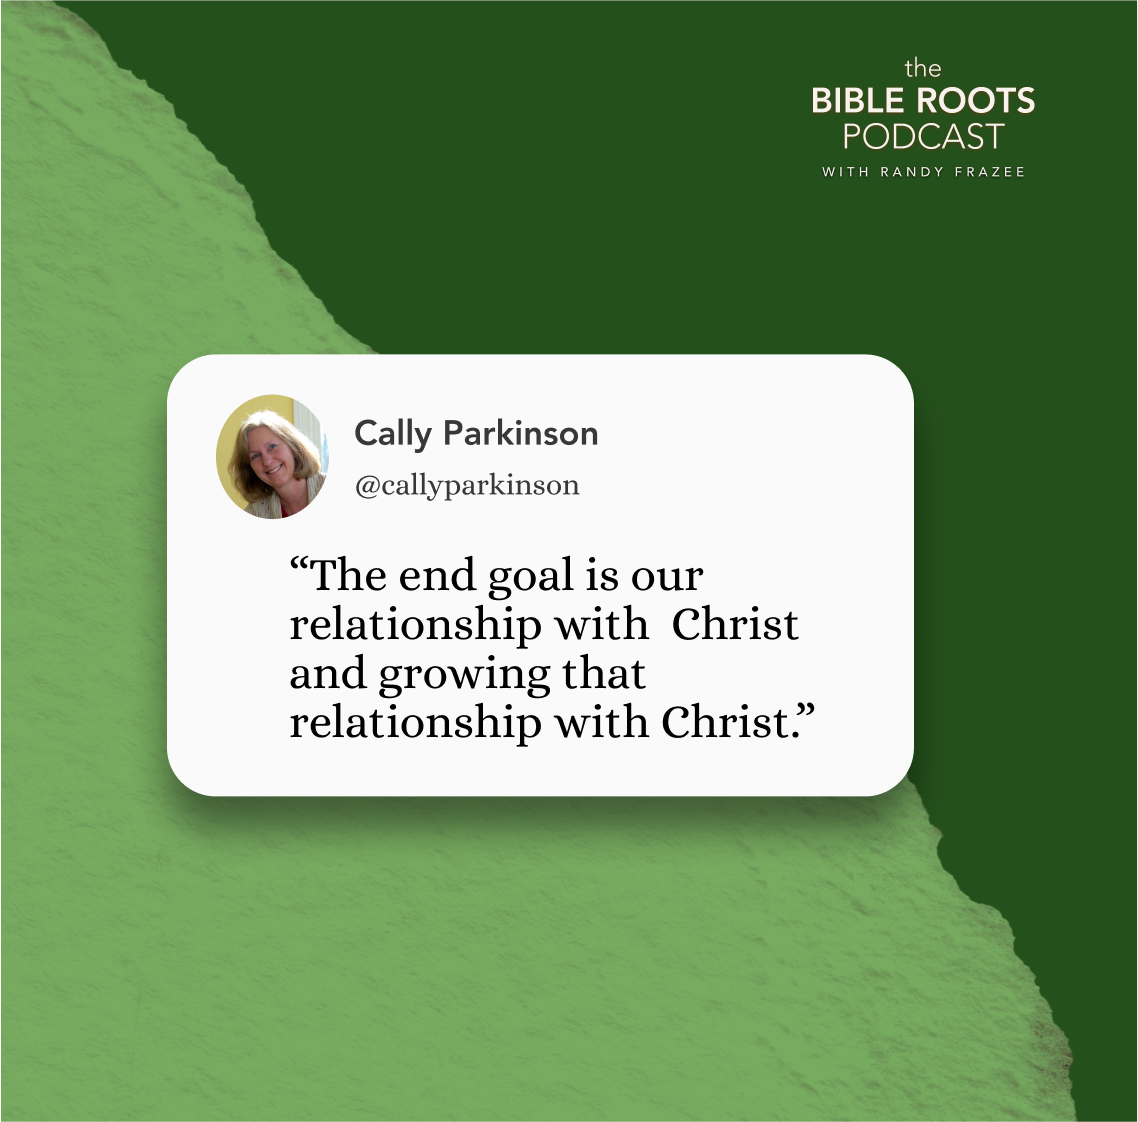 "The end goal is our relationship with Christ and growing that relationship with Christ" Cally Parkinson